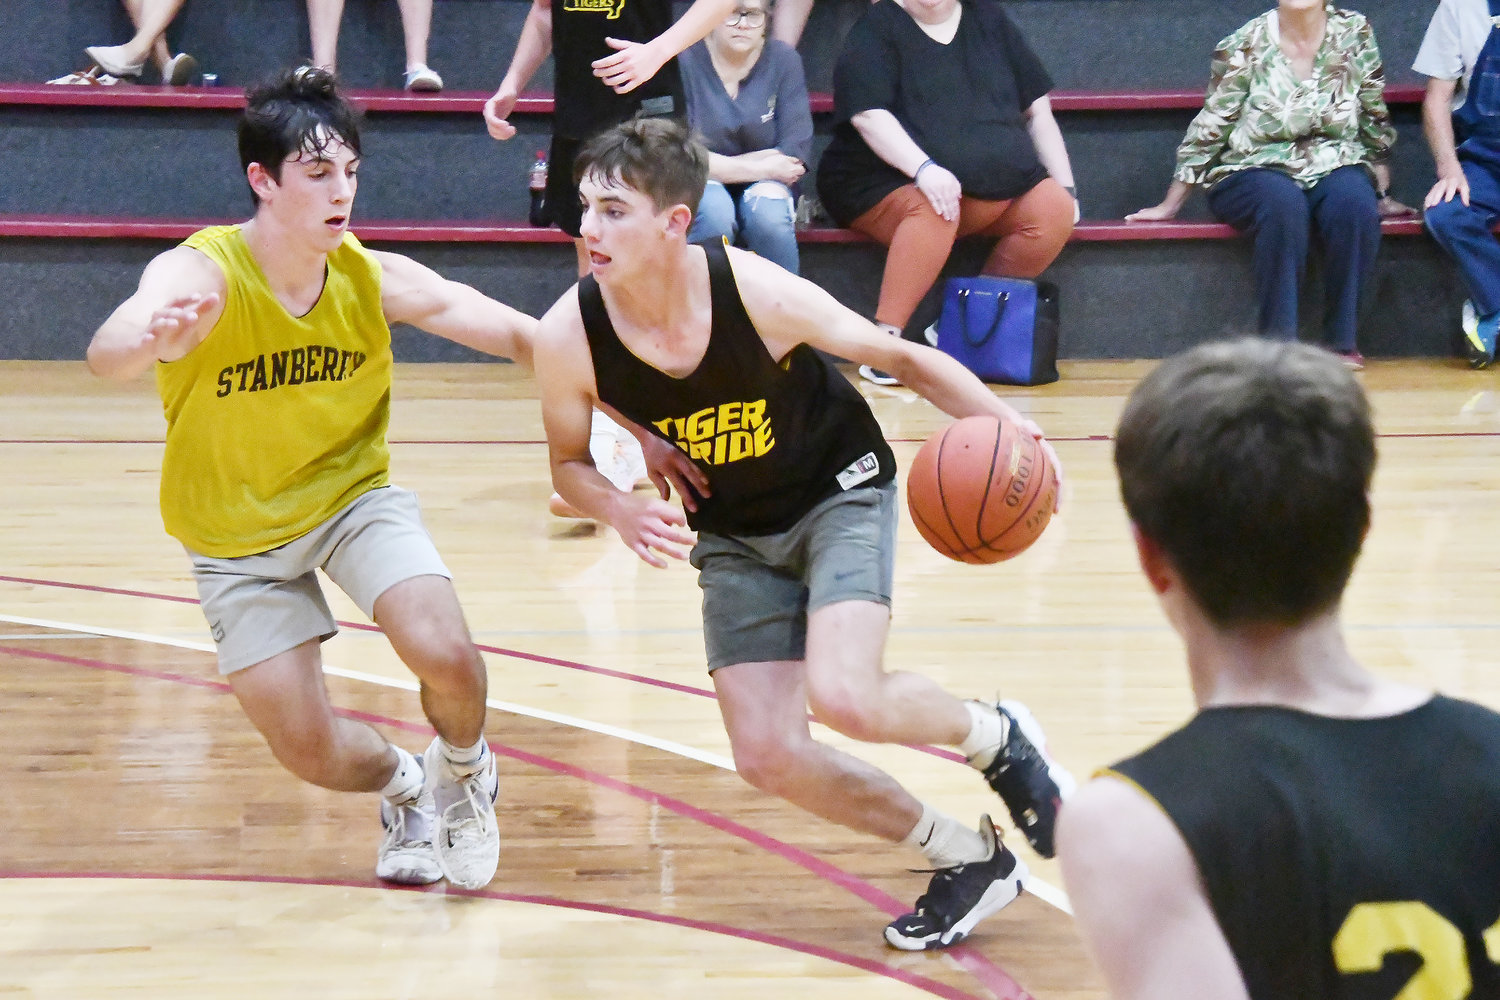 Higbee's Derek Rockett drives the lane during a scrimmage against Stanberry on Wednesday at Central Christian College of The Bible's Pelfrey Hall.